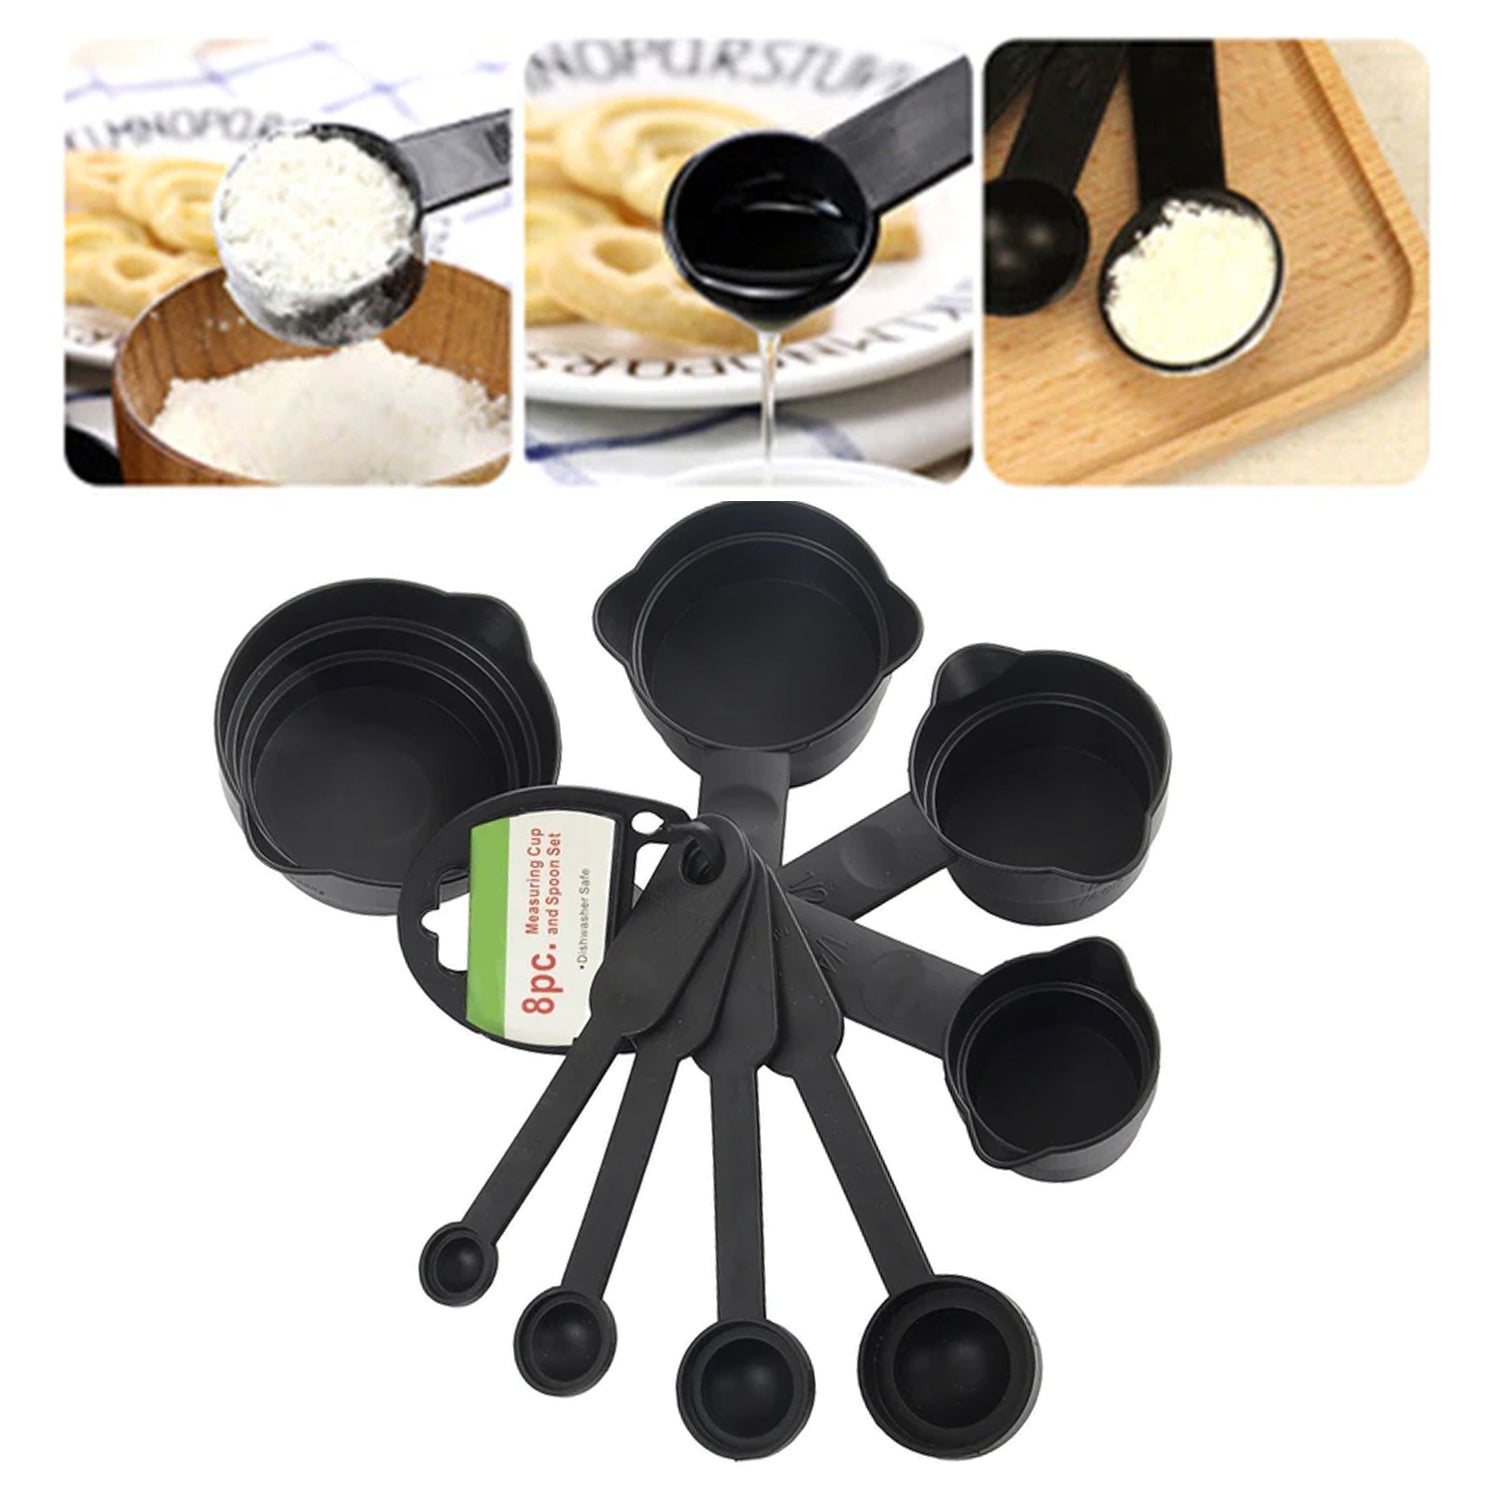 106 Plastic Measuring Cups and Spoons (8 Pcs, Black) Dukan Daily